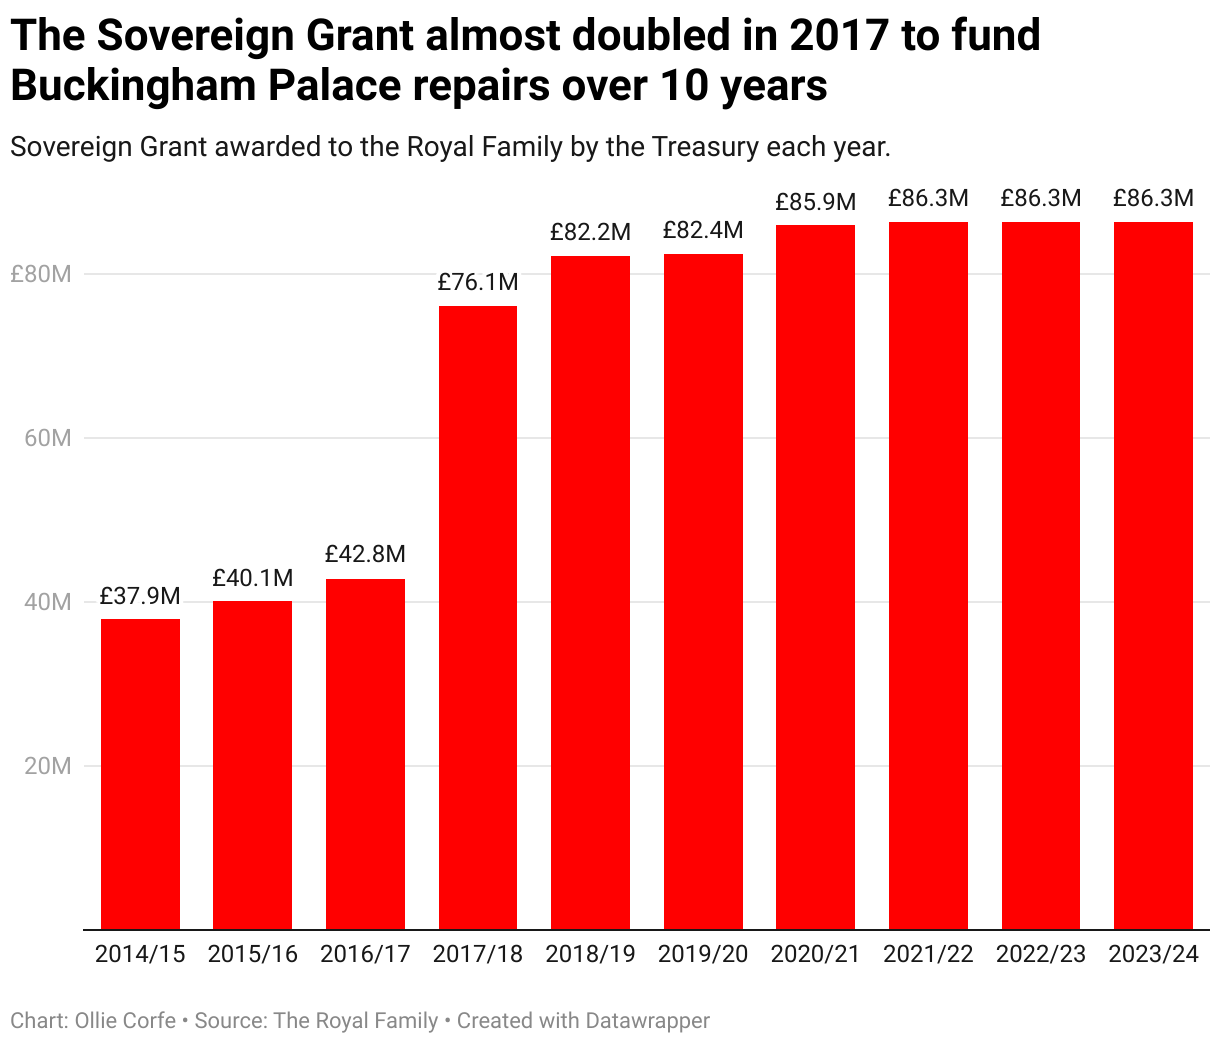 Sovereign Grant per year.